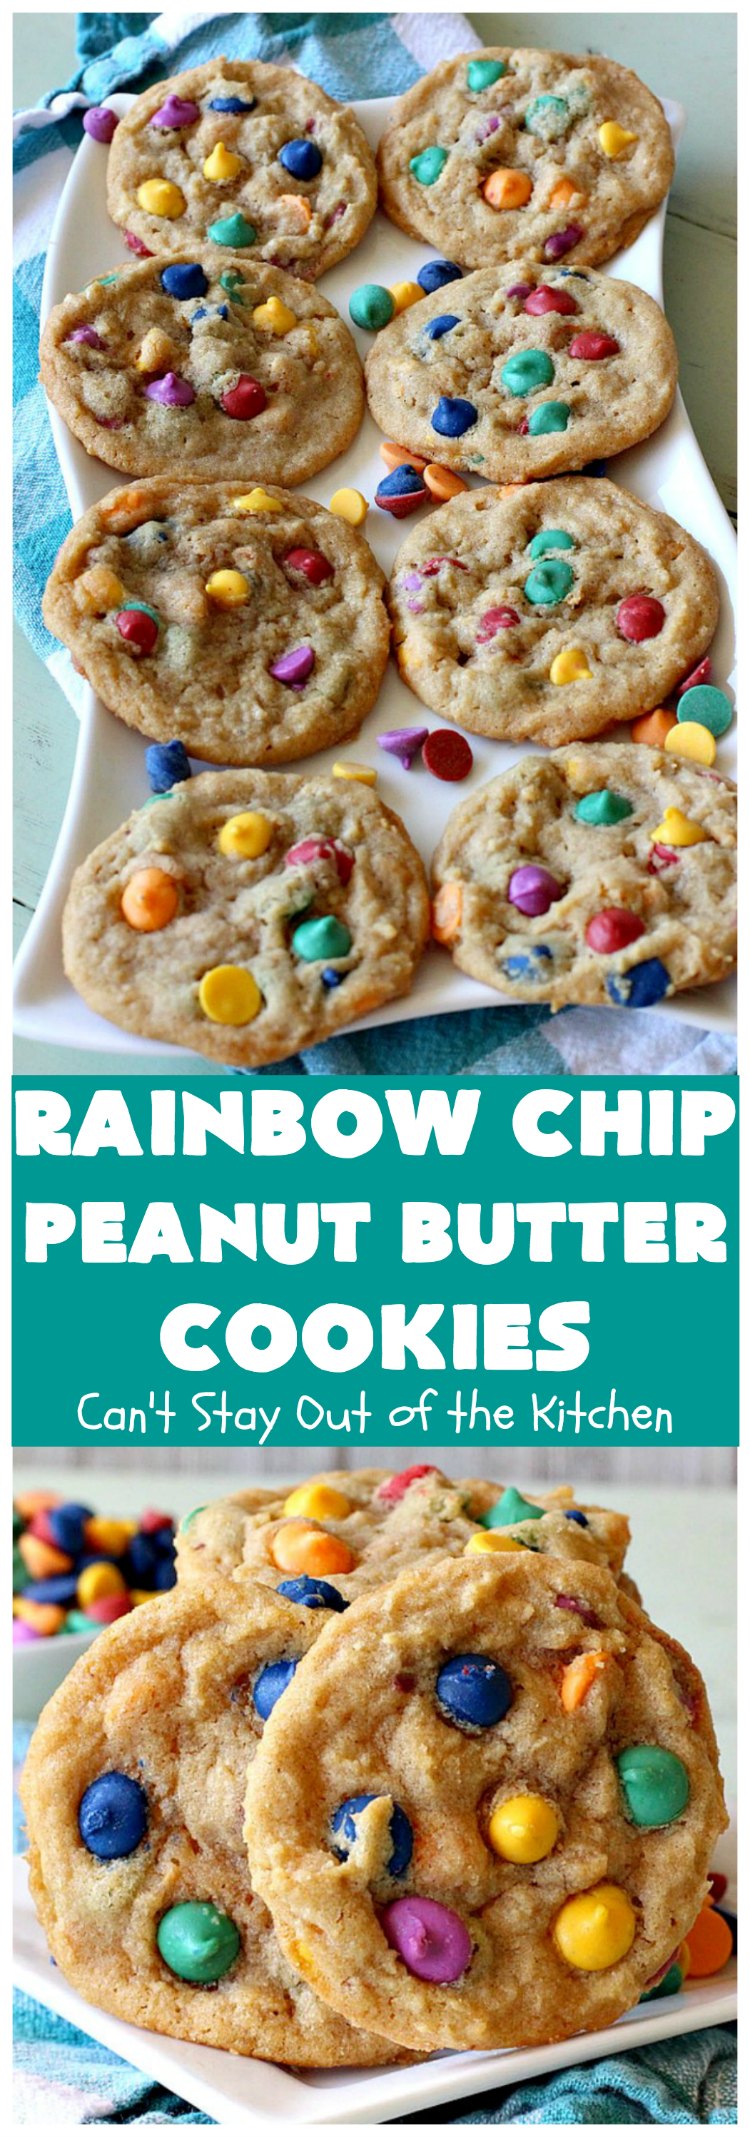 Rainbow Chip Peanut Butter Cookies | Can't Stay Out of the Kitchen